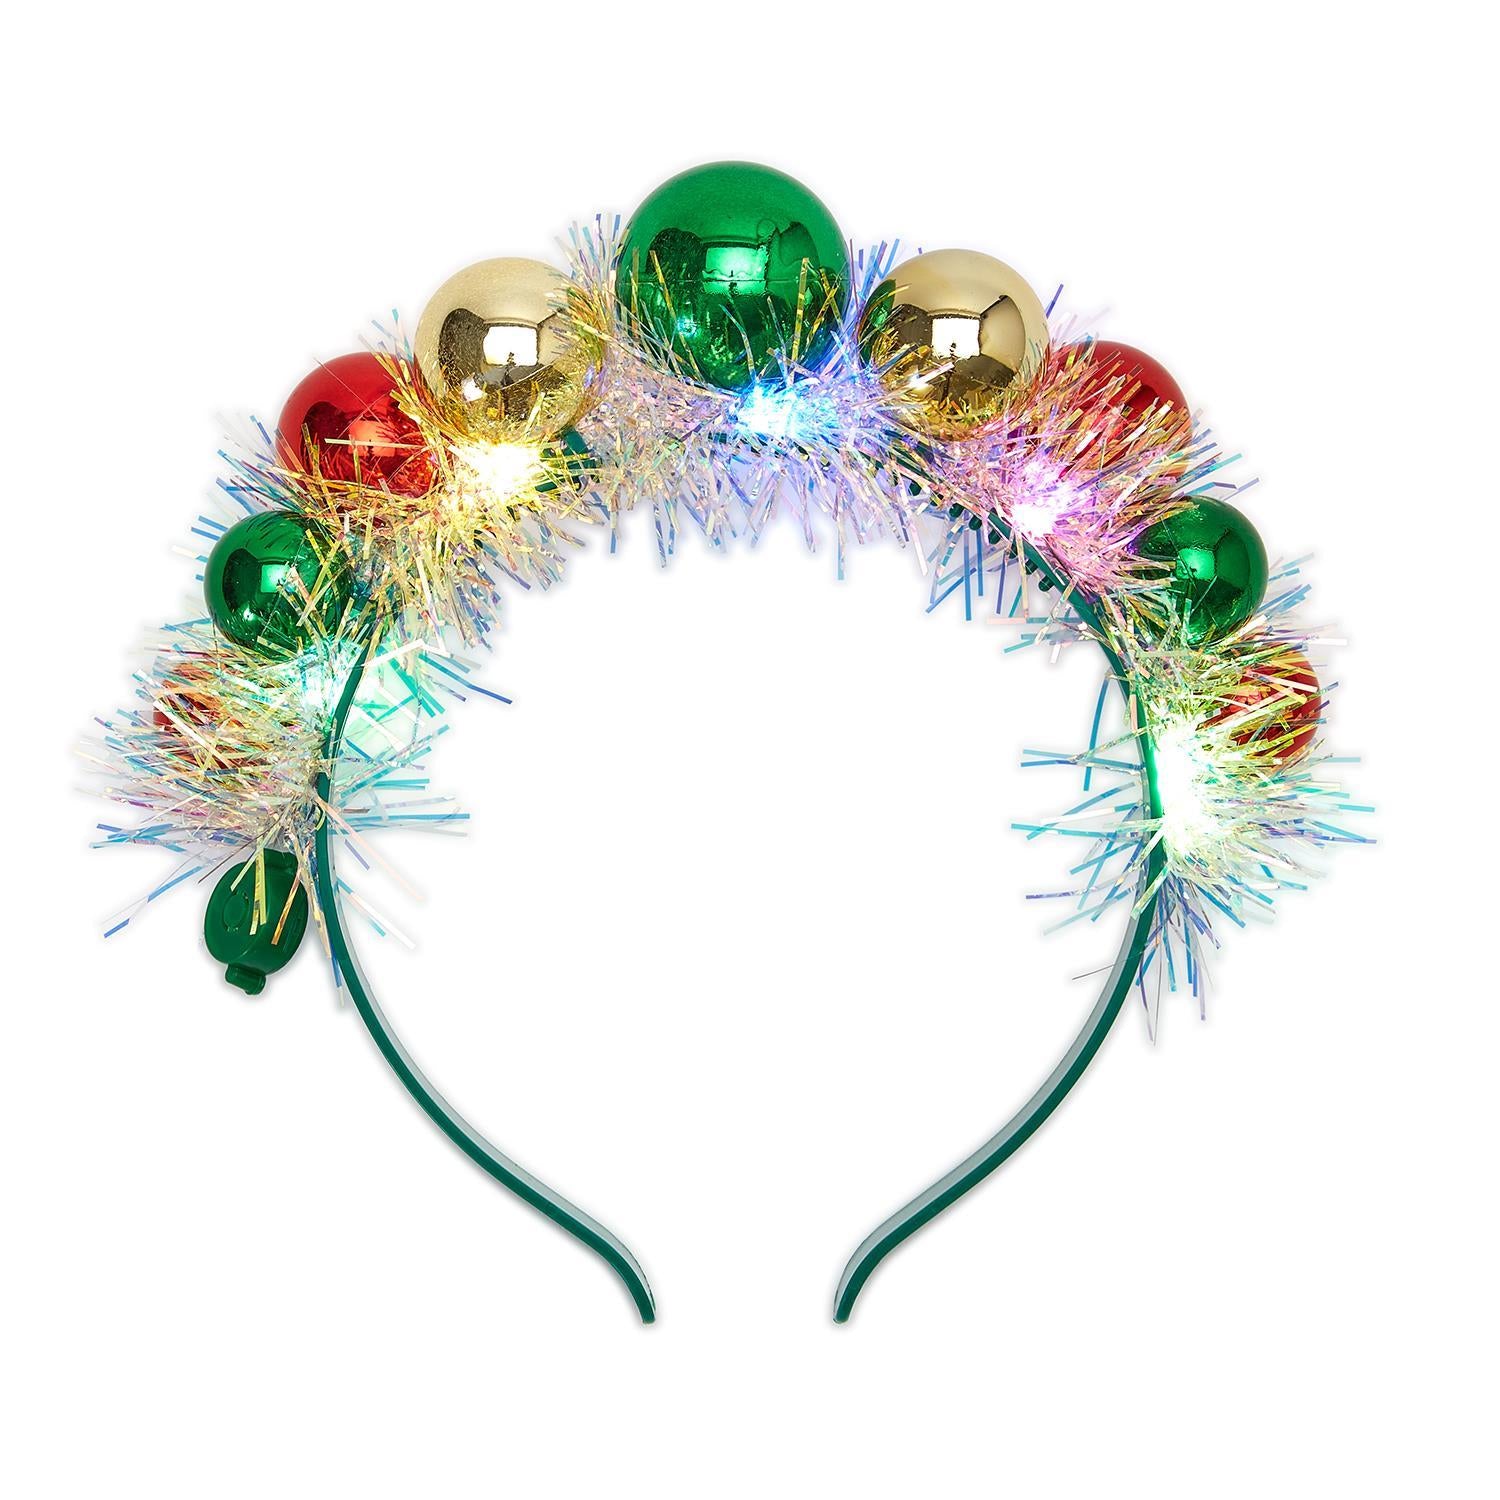 Baubles Belle Light Up Headband with 3 Modes